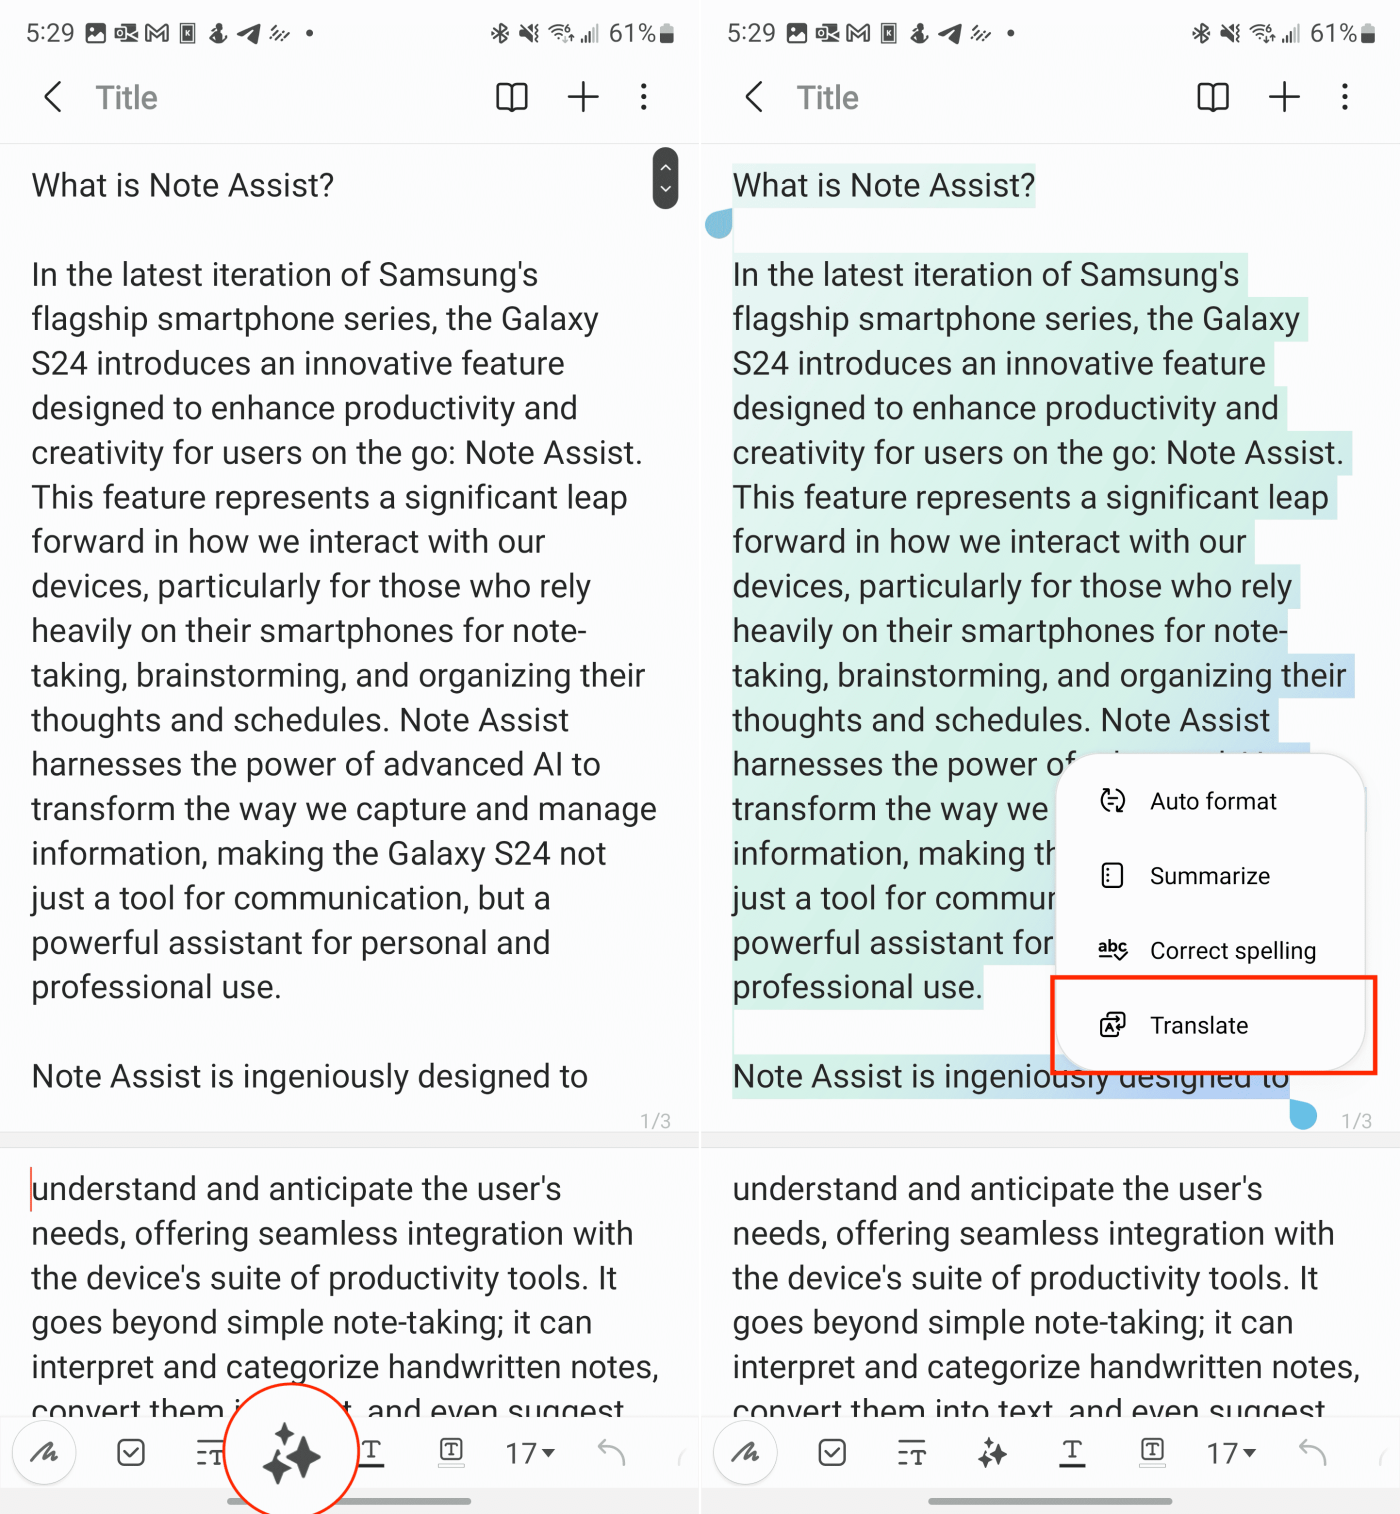 How to Use Note Assist on Galaxy S24